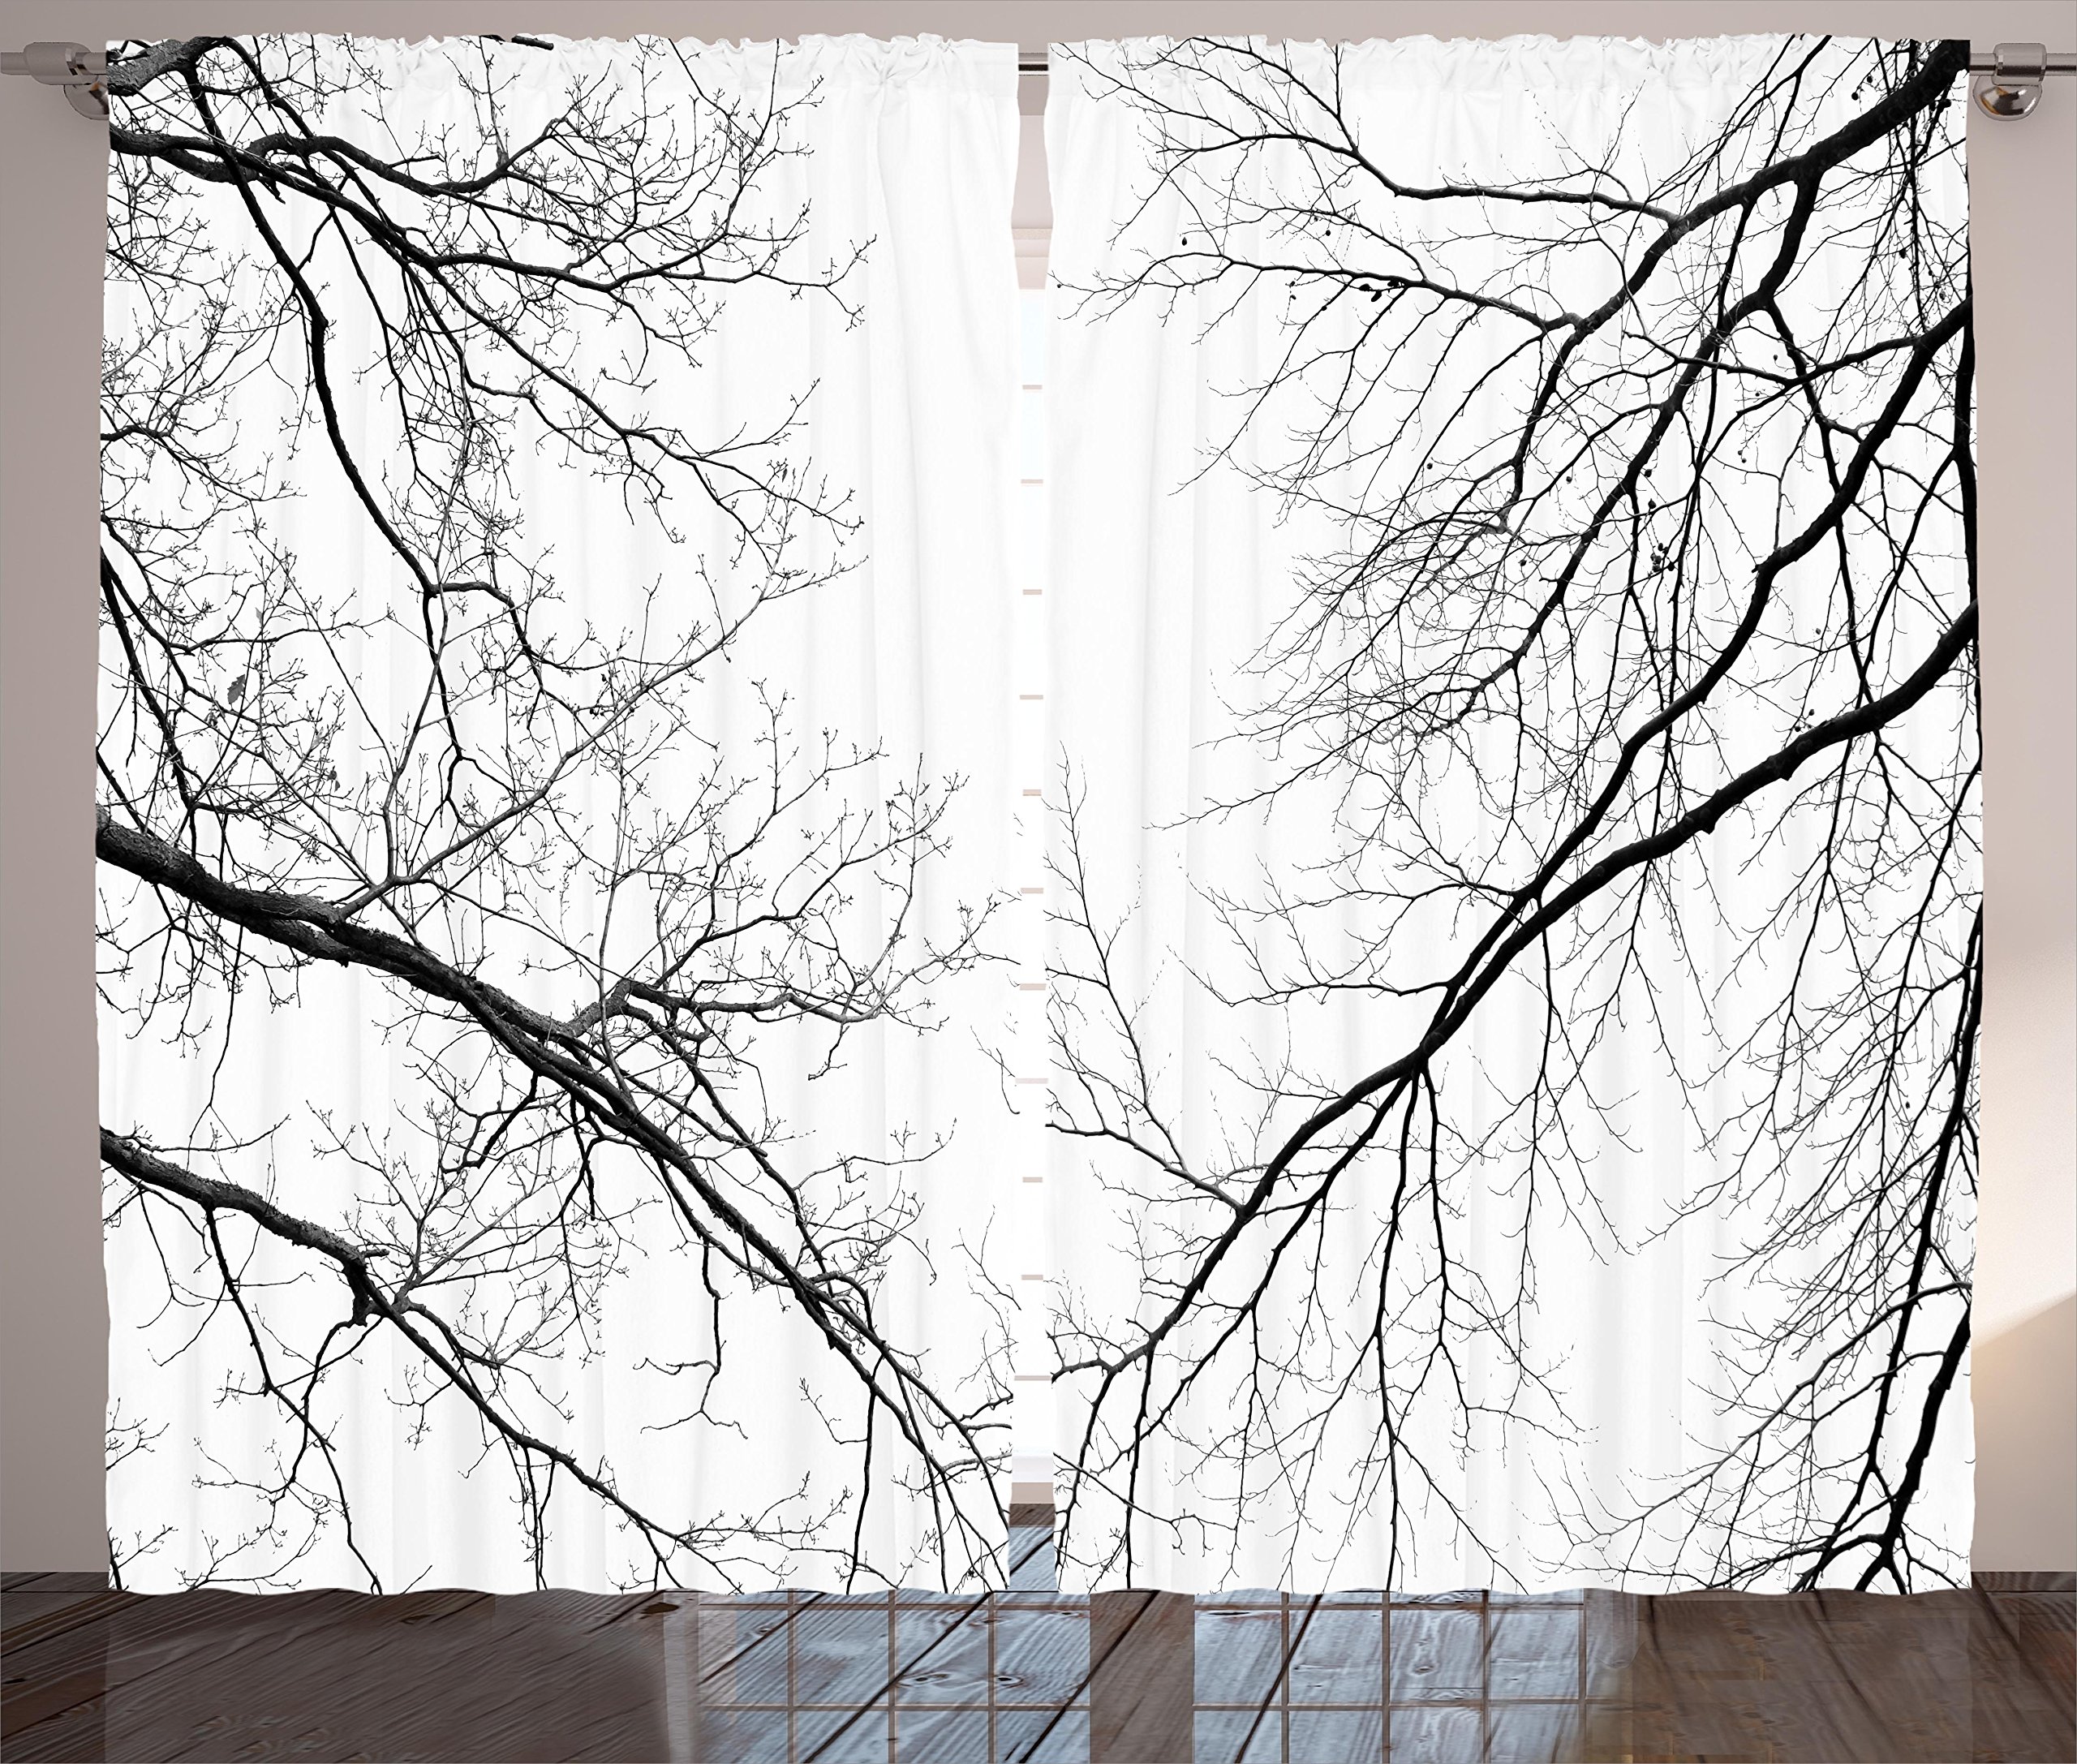 Ambesonne Forest Curtains, Trees Branches Leafless Spooky Scary Image in a Gloomy Air Sky Scene Image, Living Room Bedroom Window Drapes 2 Panel Se...